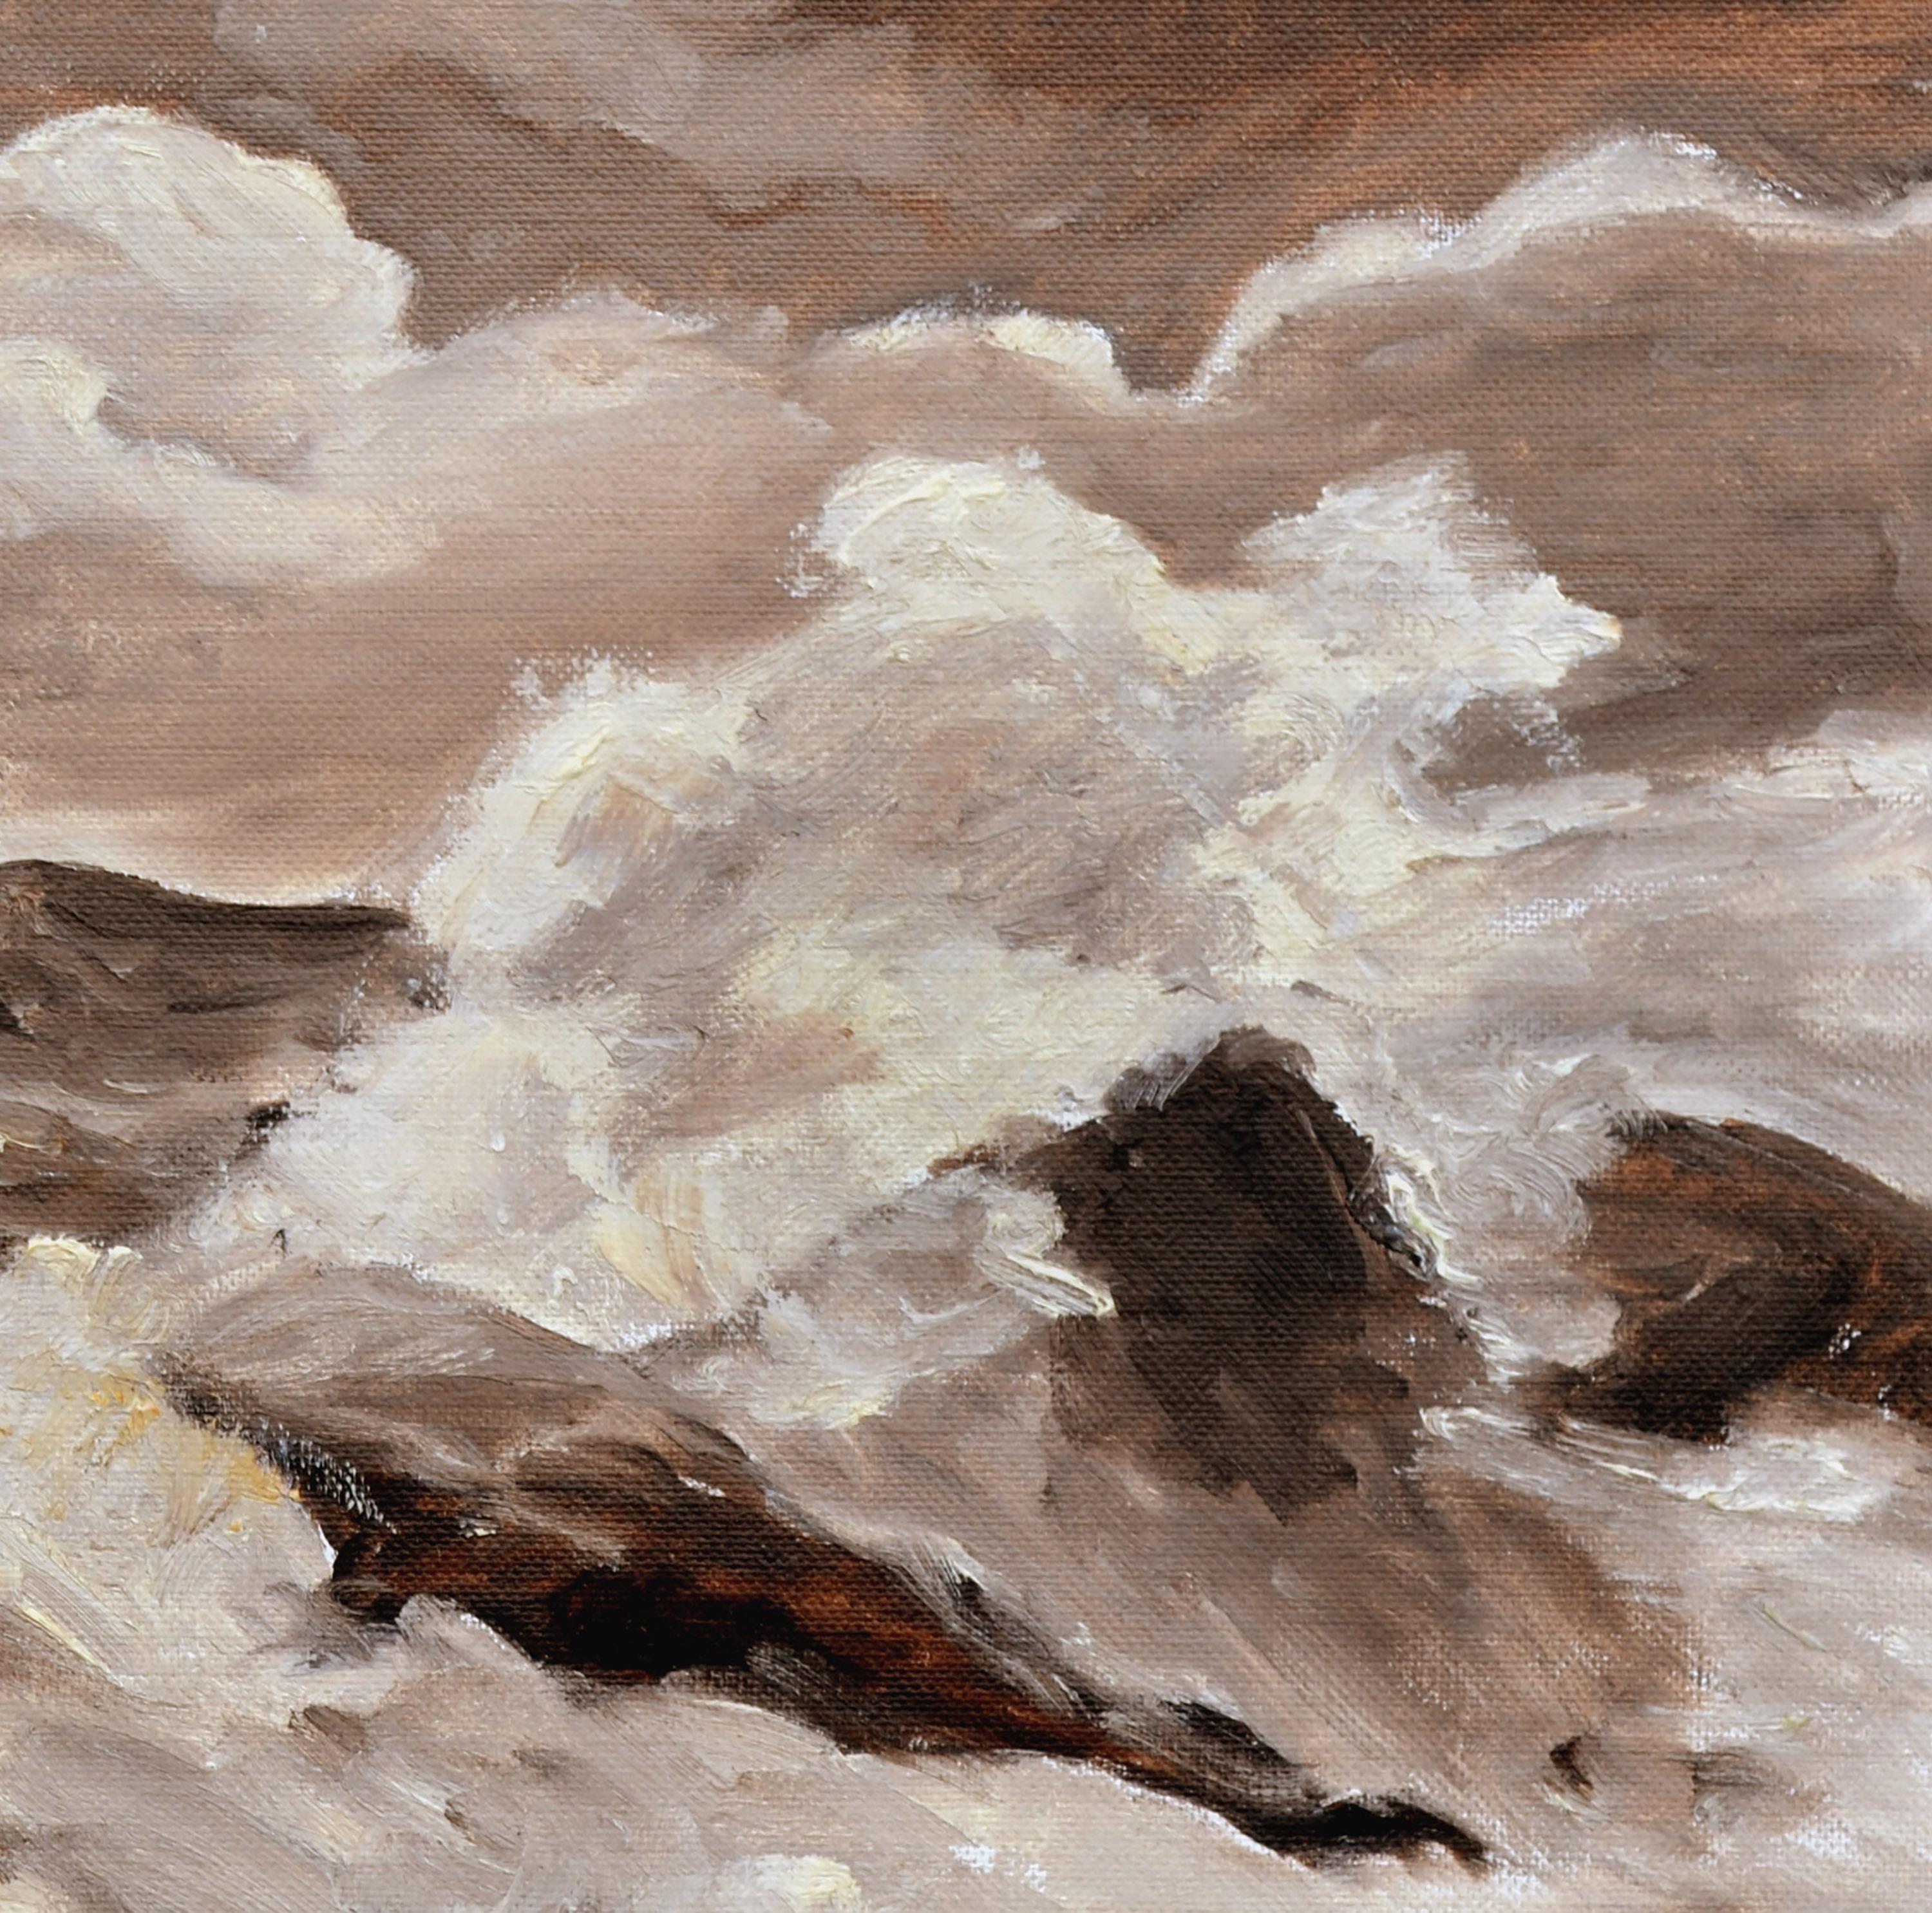 Stormy Seas - Mid Century Seascape  - American Impressionist Painting by Unknown